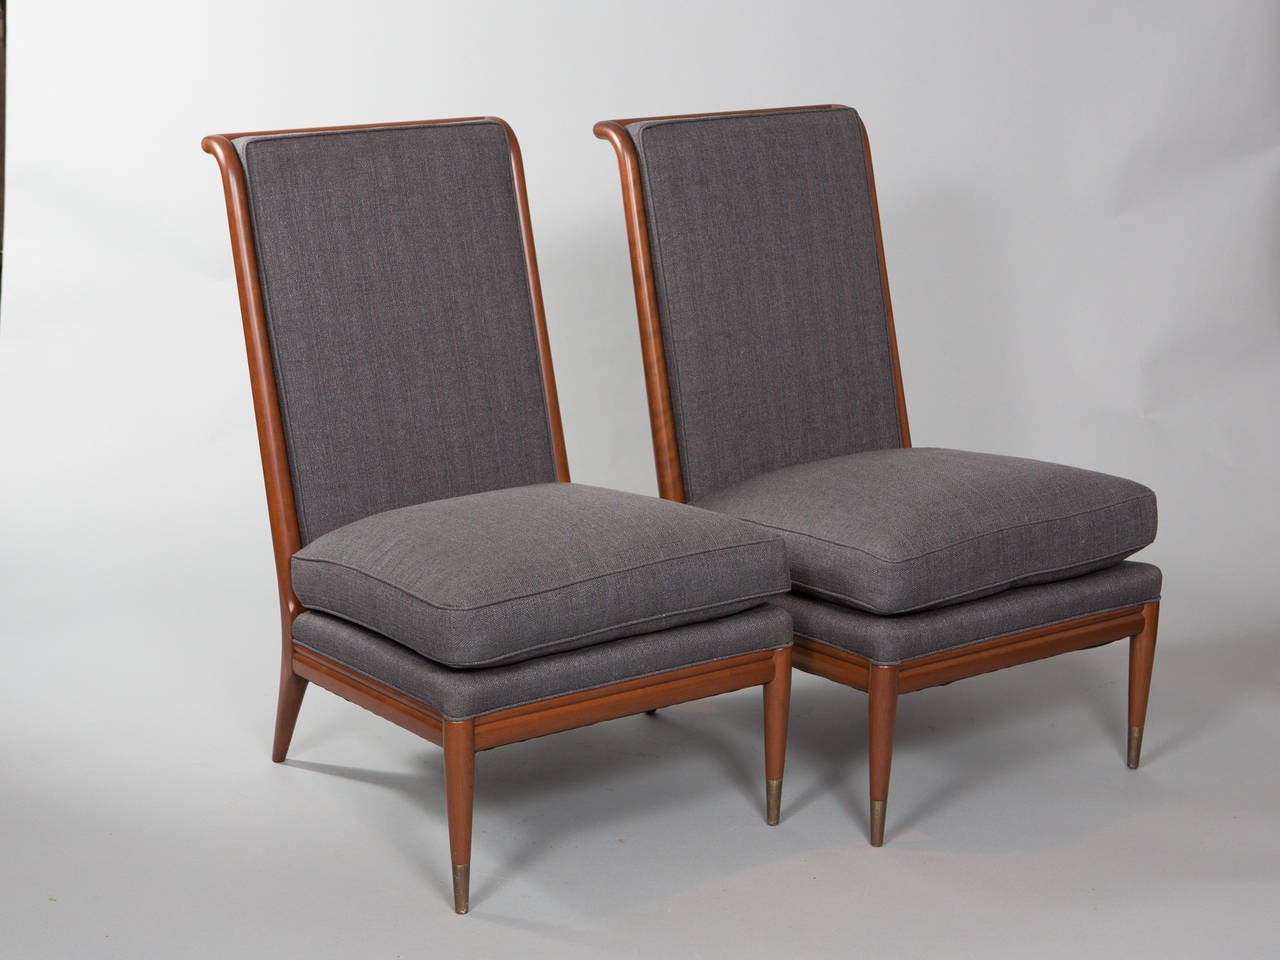 Pair of John Stuart for Widdicomb 1950's walnut slipper chairs. Tapered legs ending with brass sabots and a handsome dowel rod back. Newly upholstered and restored.
Seat depth - 23